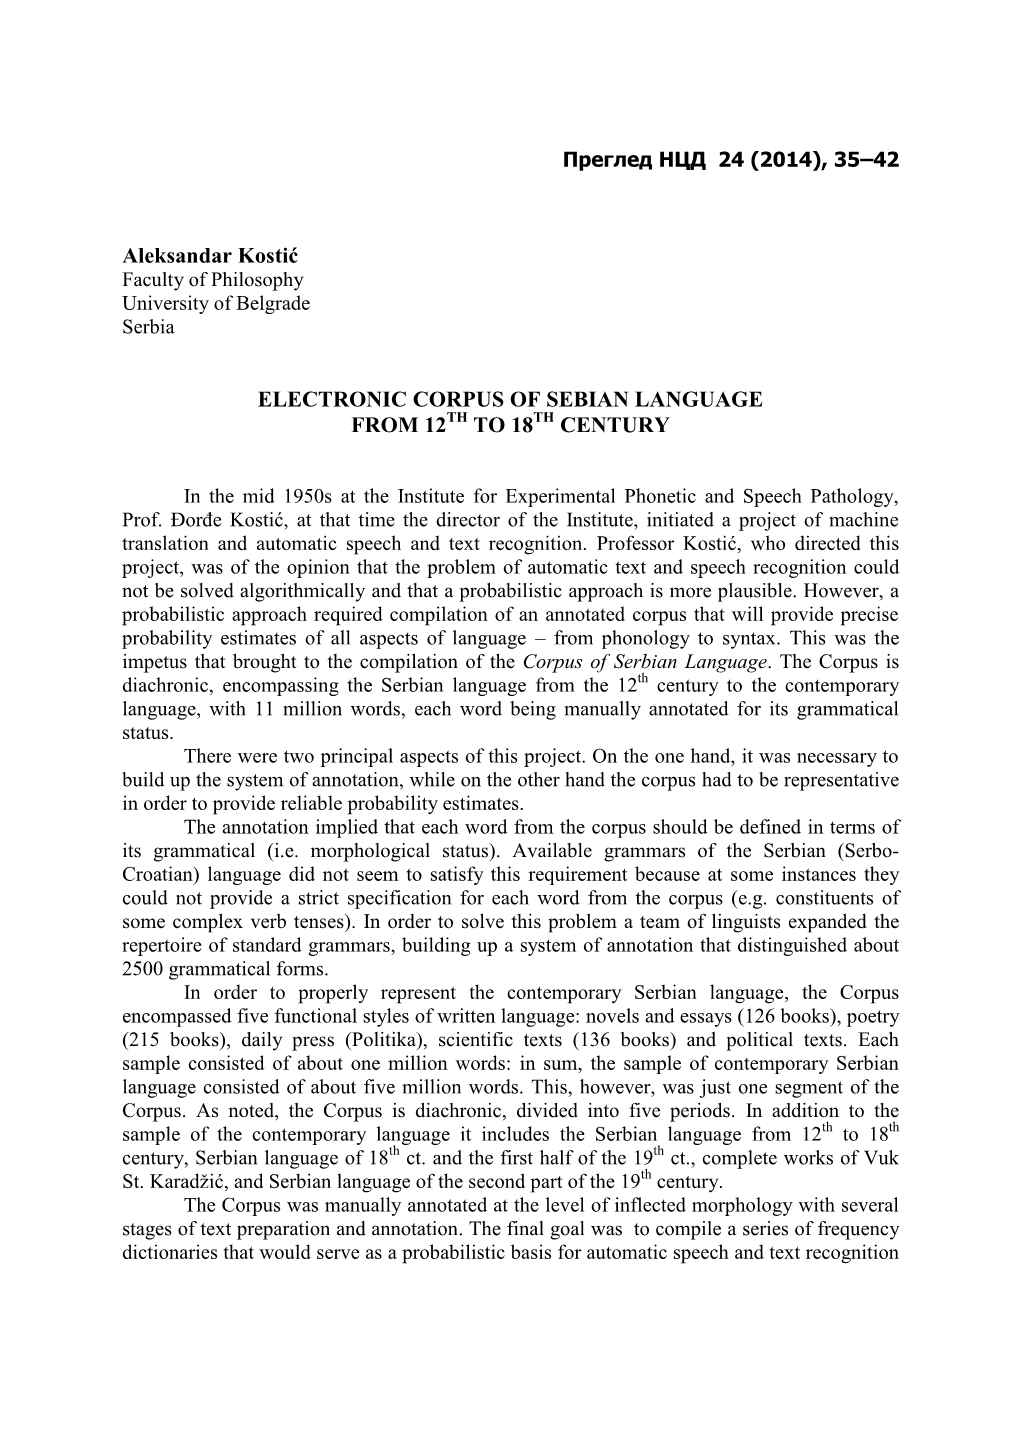 The Corpus of Serbian Language CSL Was Compiled from a Sample of 11